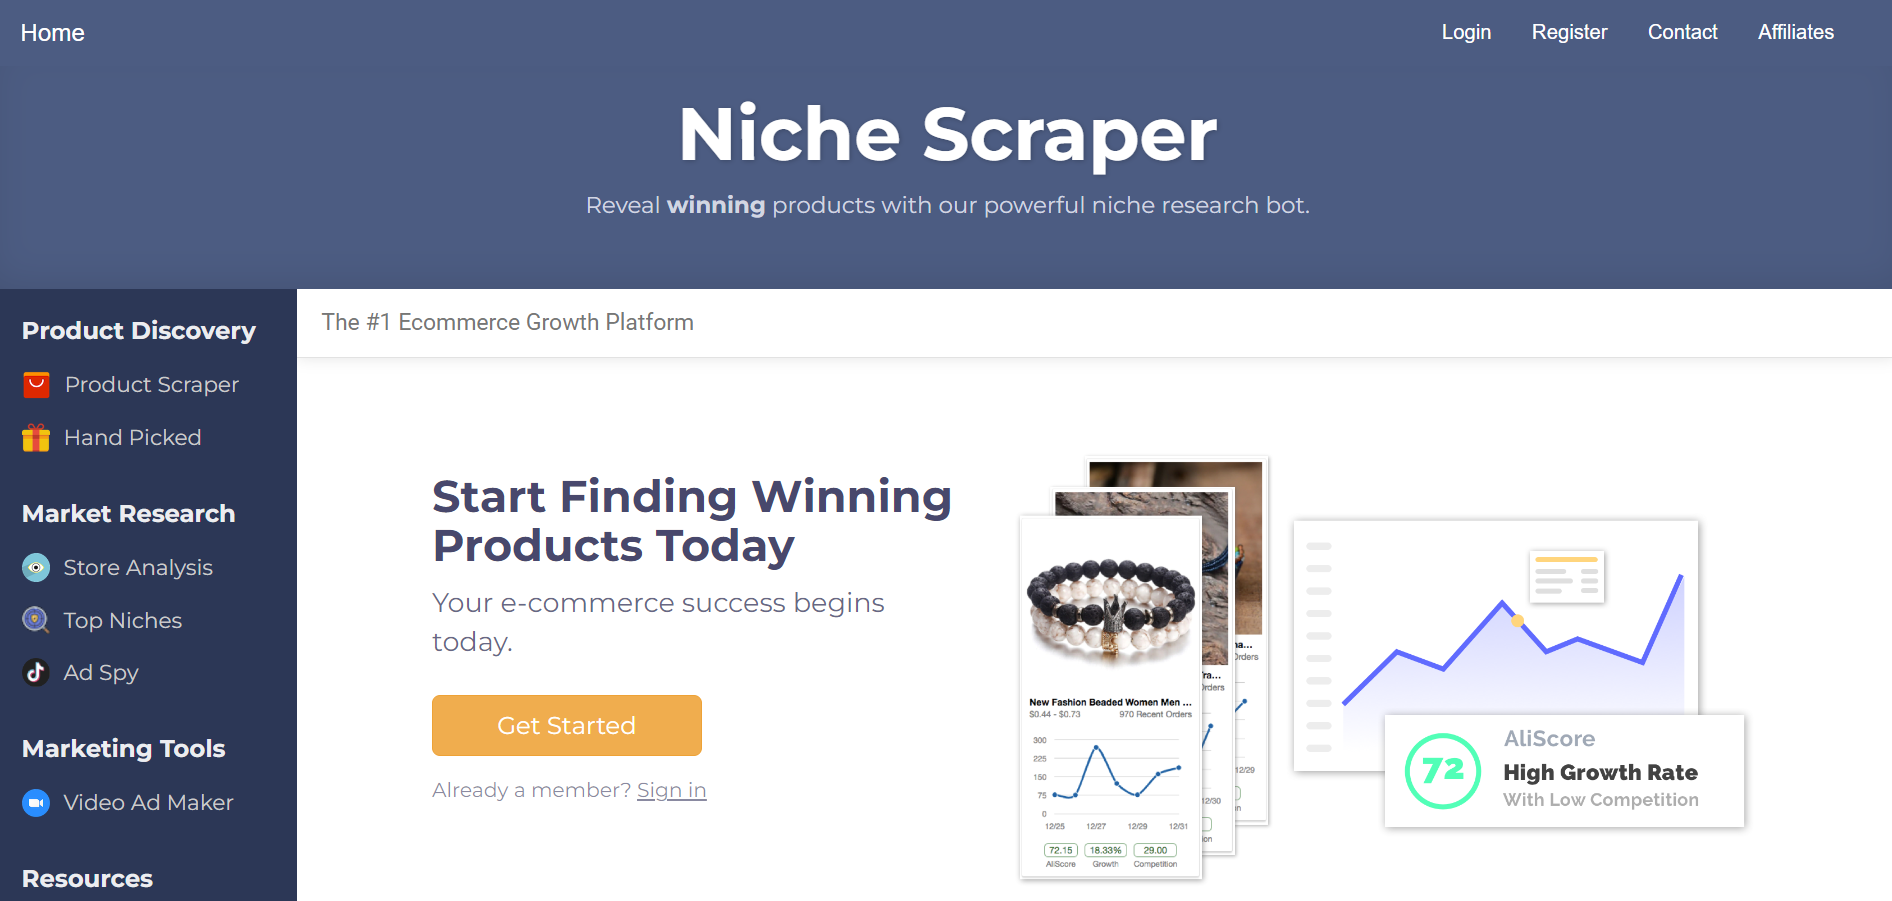 18 Best Dropshipping Product Research Tools for Winning in 2024